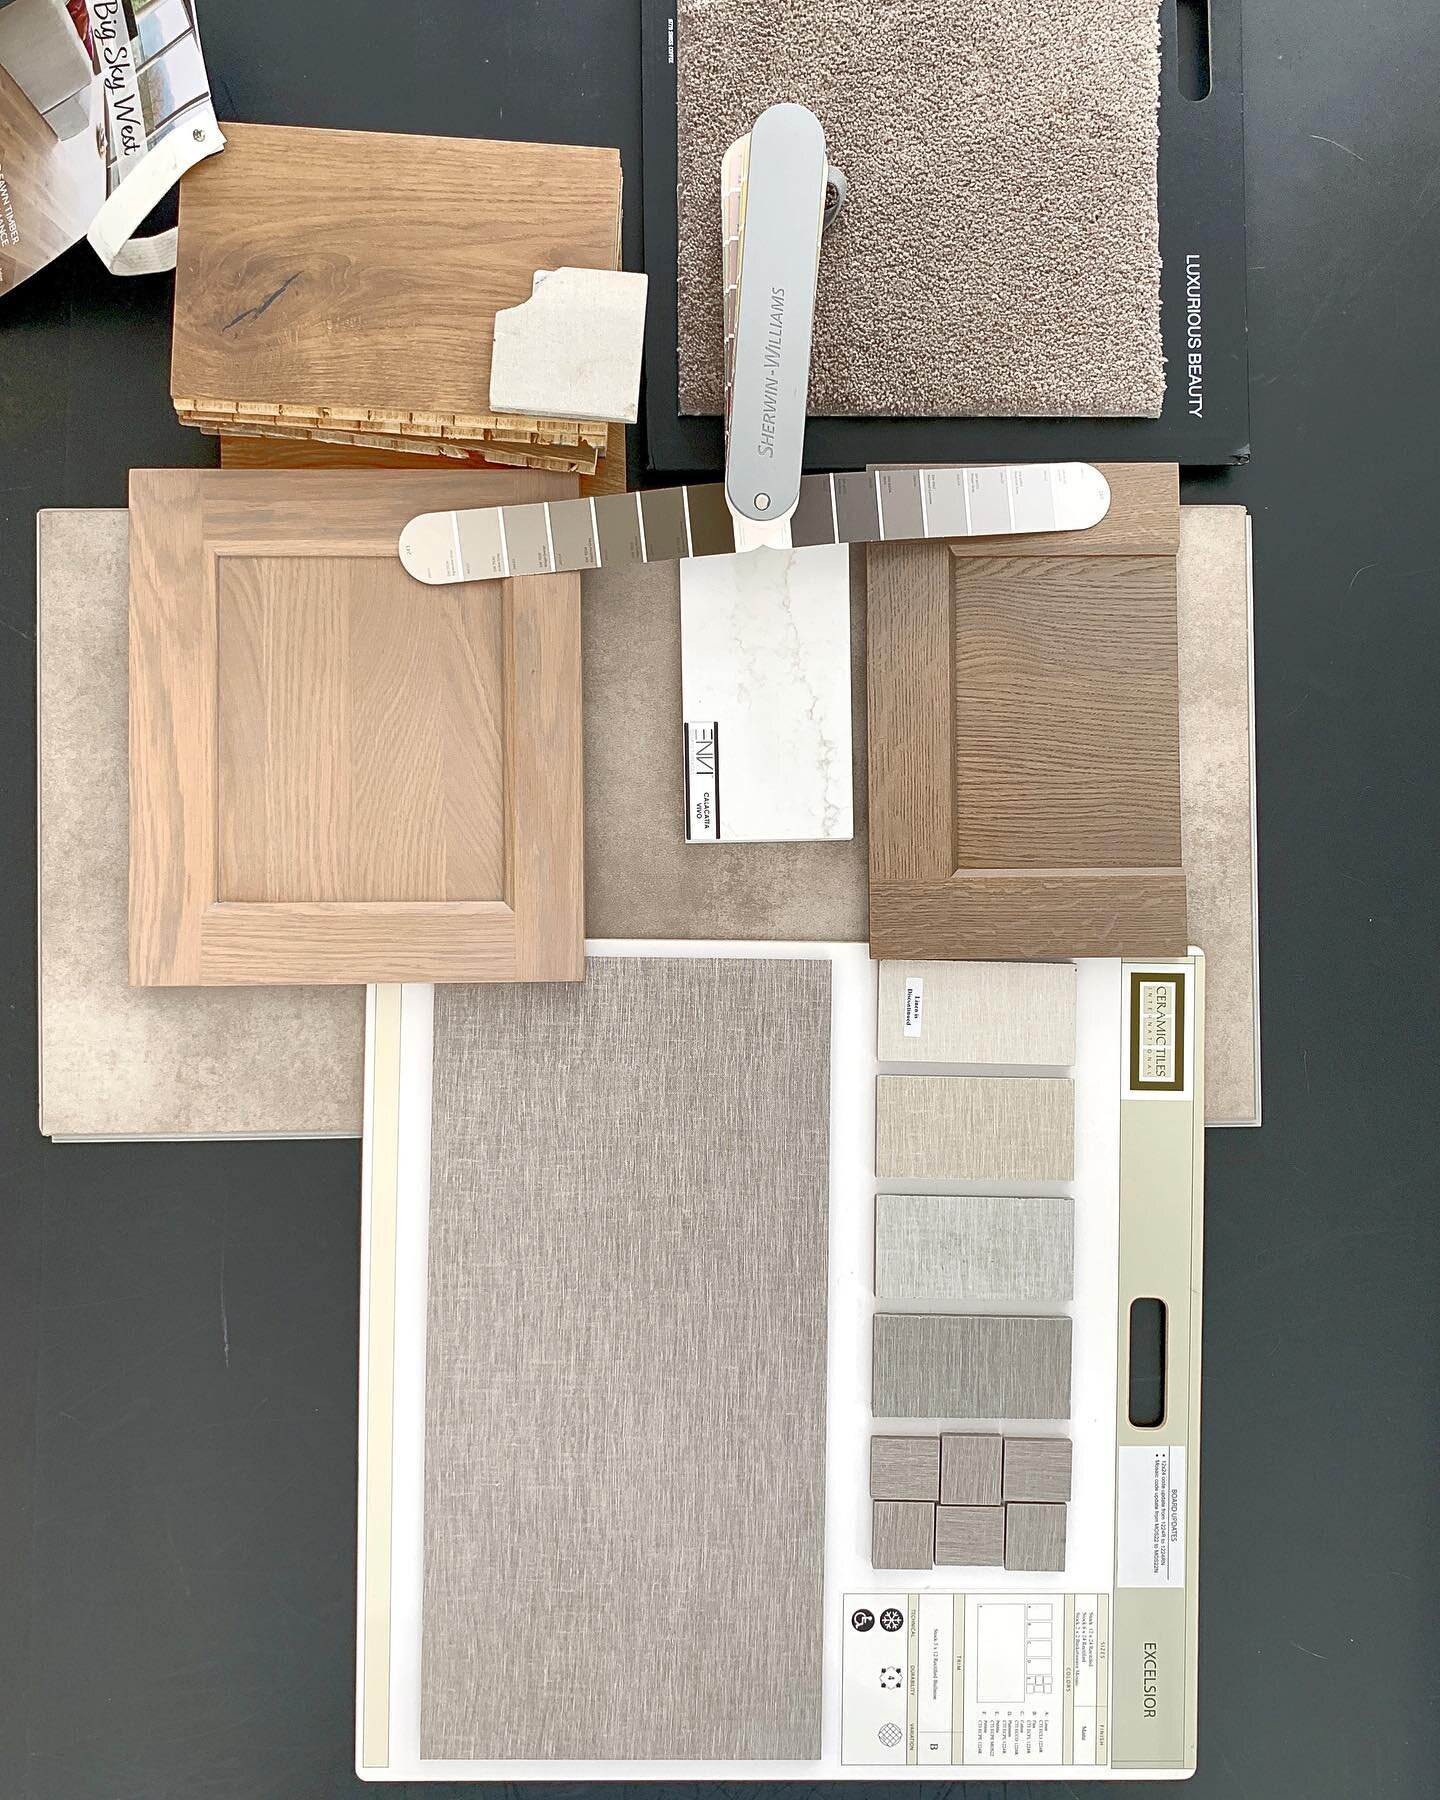 These are some of the &quot;final&quot; selections we made yesterday for our next project. 🤩

This will be a very tone-on-tone-with-loads-of-texture look. Super cozy but still contemporary. 

We previously completed remodeling the upper and lower le